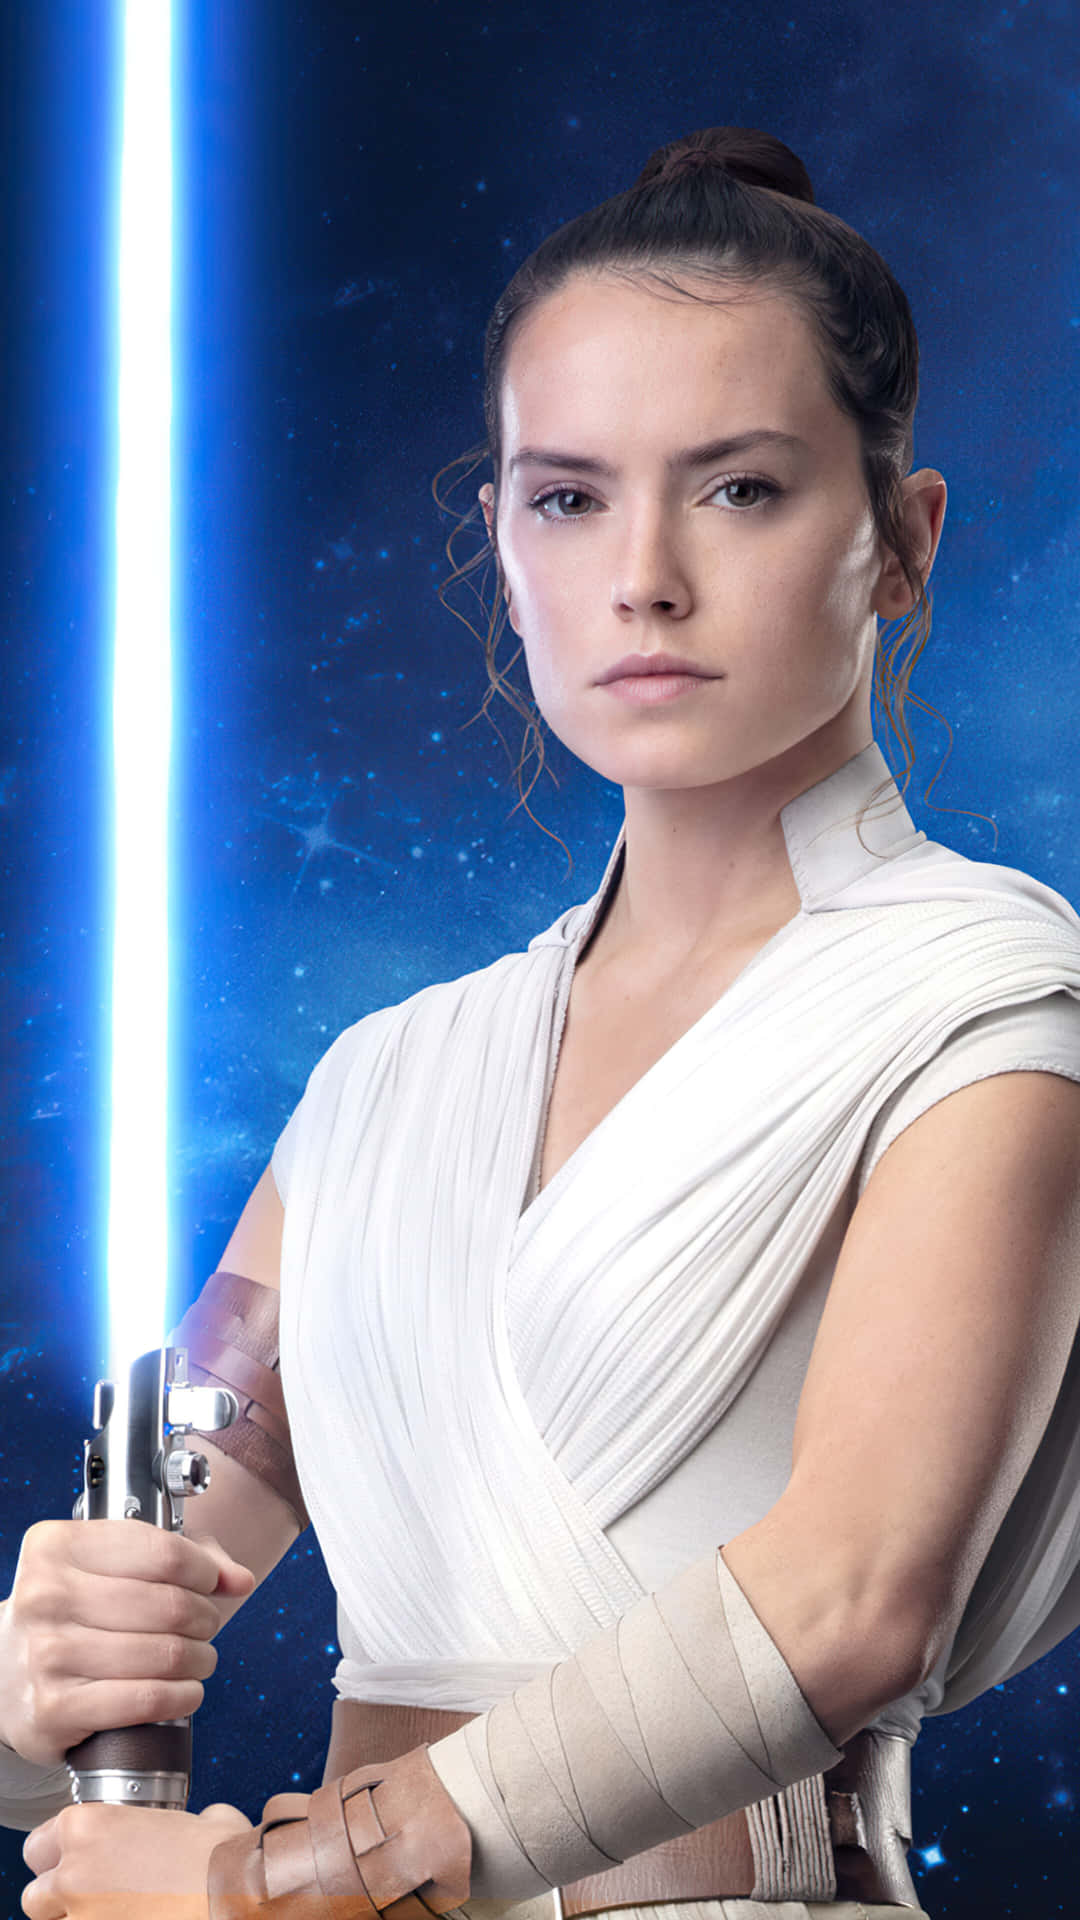 Rey in a battle to save the galaxy in Star Wars Episode IX. Wallpaper